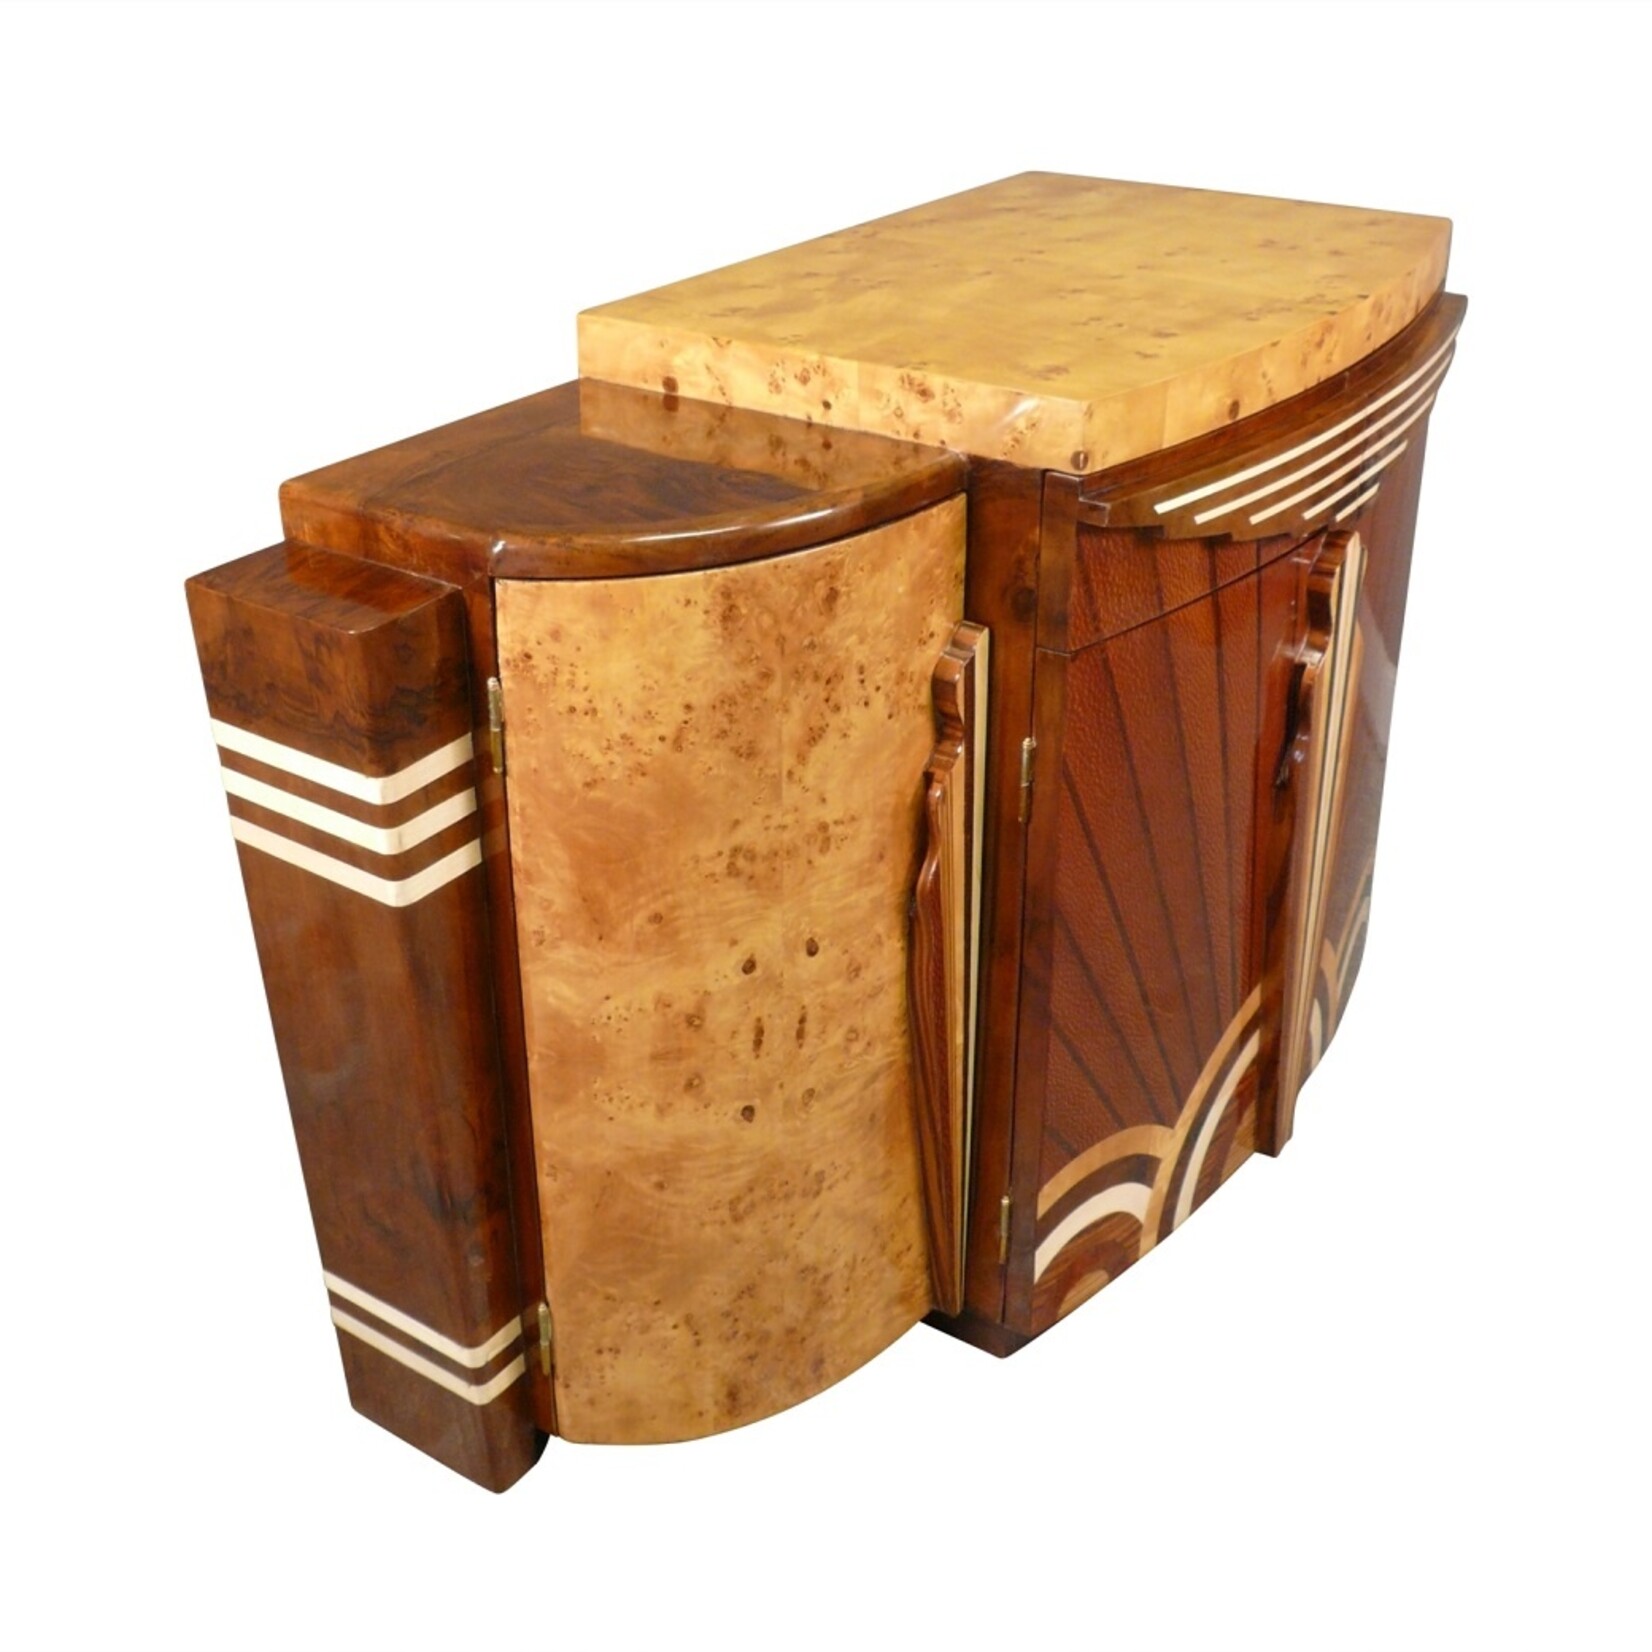 LC art deco buffet from the 1920s - Copy